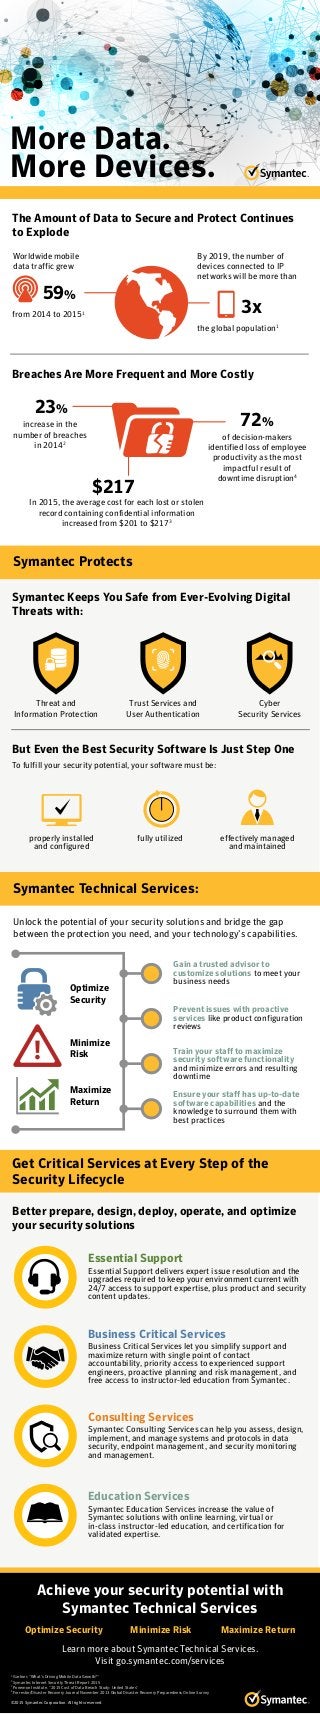 More Data.
More Devices.
Breaches Are More Frequent and More Costly
But Even the Best Security Software Is Just Step One
Better prepare, design, deploy, operate, and optimize
your security solutions
Symantec Keeps You Safe from Ever-Evolving Digital
Threats with:
Symantec Technical Services:
Symantec Protects
Get Critical Services at Every Step of the
Security Lifecycle
3xfrom 2014 to 20151
the global population1
To fulfill your security potential, your software must be:
Unlock the potential of your security solutions and bridge the gap
between the protection you need, and your technology’s capabilities.
59%
effectively managed
and maintained
fully utilizedproperly installed
and configured
Gain a trusted advisor to
customize solutions to meet your
business needs
Prevent issues with proactive
services like product configuration
reviews
Train your staff to maximize
security software functionality
and minimize errors and resulting
downtime
Ensure your staff has up-to-date
software capabilities and the
knowledge to surround them with
best practices
Achieve your security potential with
Symantec Technical Services
Learn more about Symantec Technical Services.
Visit go.symantec.com/services
Optimize Security Minimize Risk Maximize Return
1
Gartner, “What’s Driving Mobile Data Growth?”
2
Symantec Internet Security Threat Report 2015
3
Ponemon Institute, “2015 Cost of Data Breach Study: United States”
4
Forrester/Disaster Recovery Journal November 2013 Global Disaster Recovery Preparedness Online Survey
©2015 Symantec Corporation. All rights reserved.
The Amount of Data to Secure and Protect Continues
to Explode
Worldwide mobile
data traffic grew
By 2019, the number of
devices connected to IP
networks will be more than
increase in the
number of breaches
in 20142
23%
In 2015, the average cost for each lost or stolen
record containing confidential information
increased from $201 to $2173
$217
72%
of decision-makers
identified loss of employee
productivity as the most
impactful result of
downtime disruption4
Trust Services and
User Authentication
Threat and
Information Protection
Cyber
Security Services
Maximize
Return
Essential Support
Essential Support delivers expert issue resolution and the
upgrades required to keep your environment current with
24/7 access to support expertise, plus product and security
content updates.
Business Critical Services
Business Critical Services let you simplify support and
maximize return with single point of contact
accountability, priority access to experienced support
engineers, proactive planning and risk management, and
free access to instructor-led education from Symantec.
Consulting Services
Symantec Consulting Services can help you assess, design,
implement, and manage systems and protocols in data
security, endpoint management, and security monitoring
and management.
Education Services
Symantec Education Services increase the value of
Symantec solutions with online learning, virtual or
in-class instructor-led education, and certification for
validated expertise.
Optimize
Security
Minimize
Risk
 